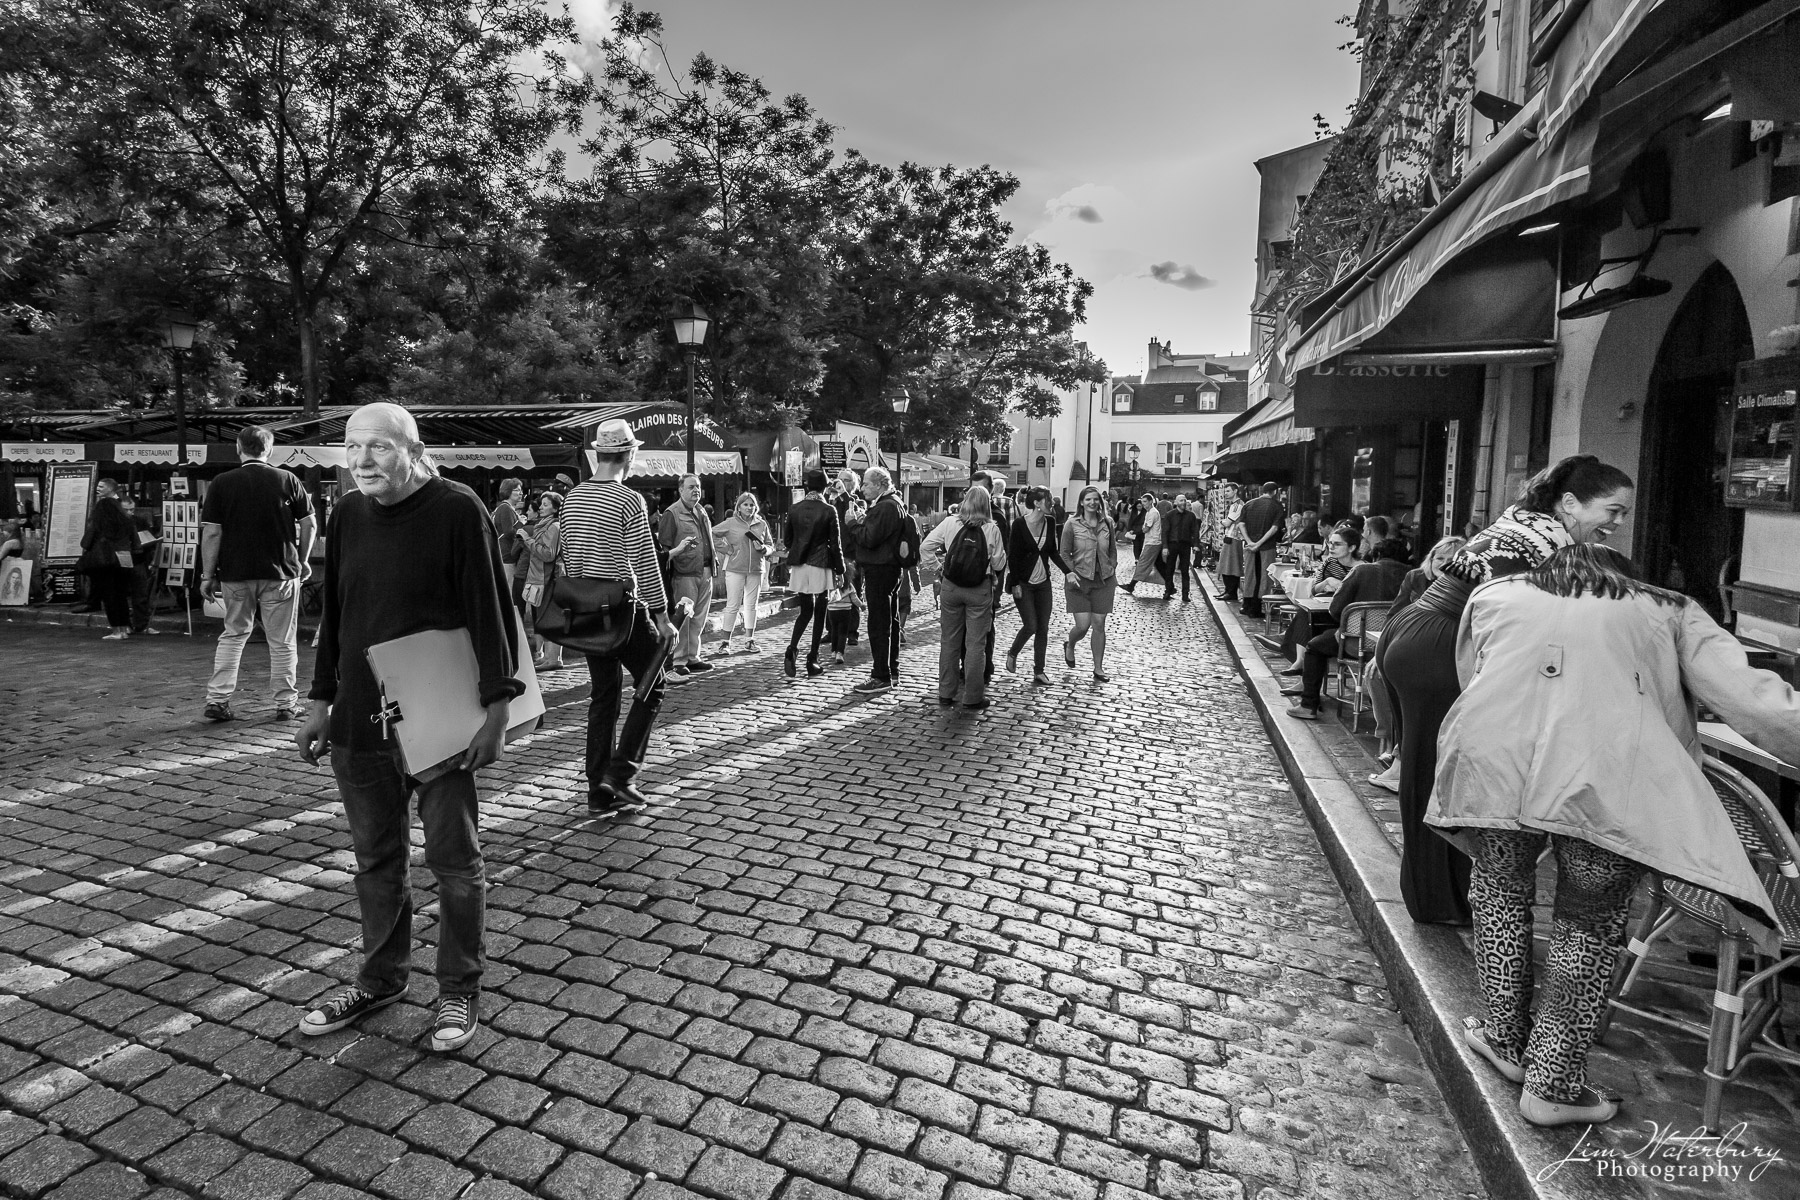 Artists and tourists mingle in Place du Tertre in Montmartre, Paris.  Black & white.